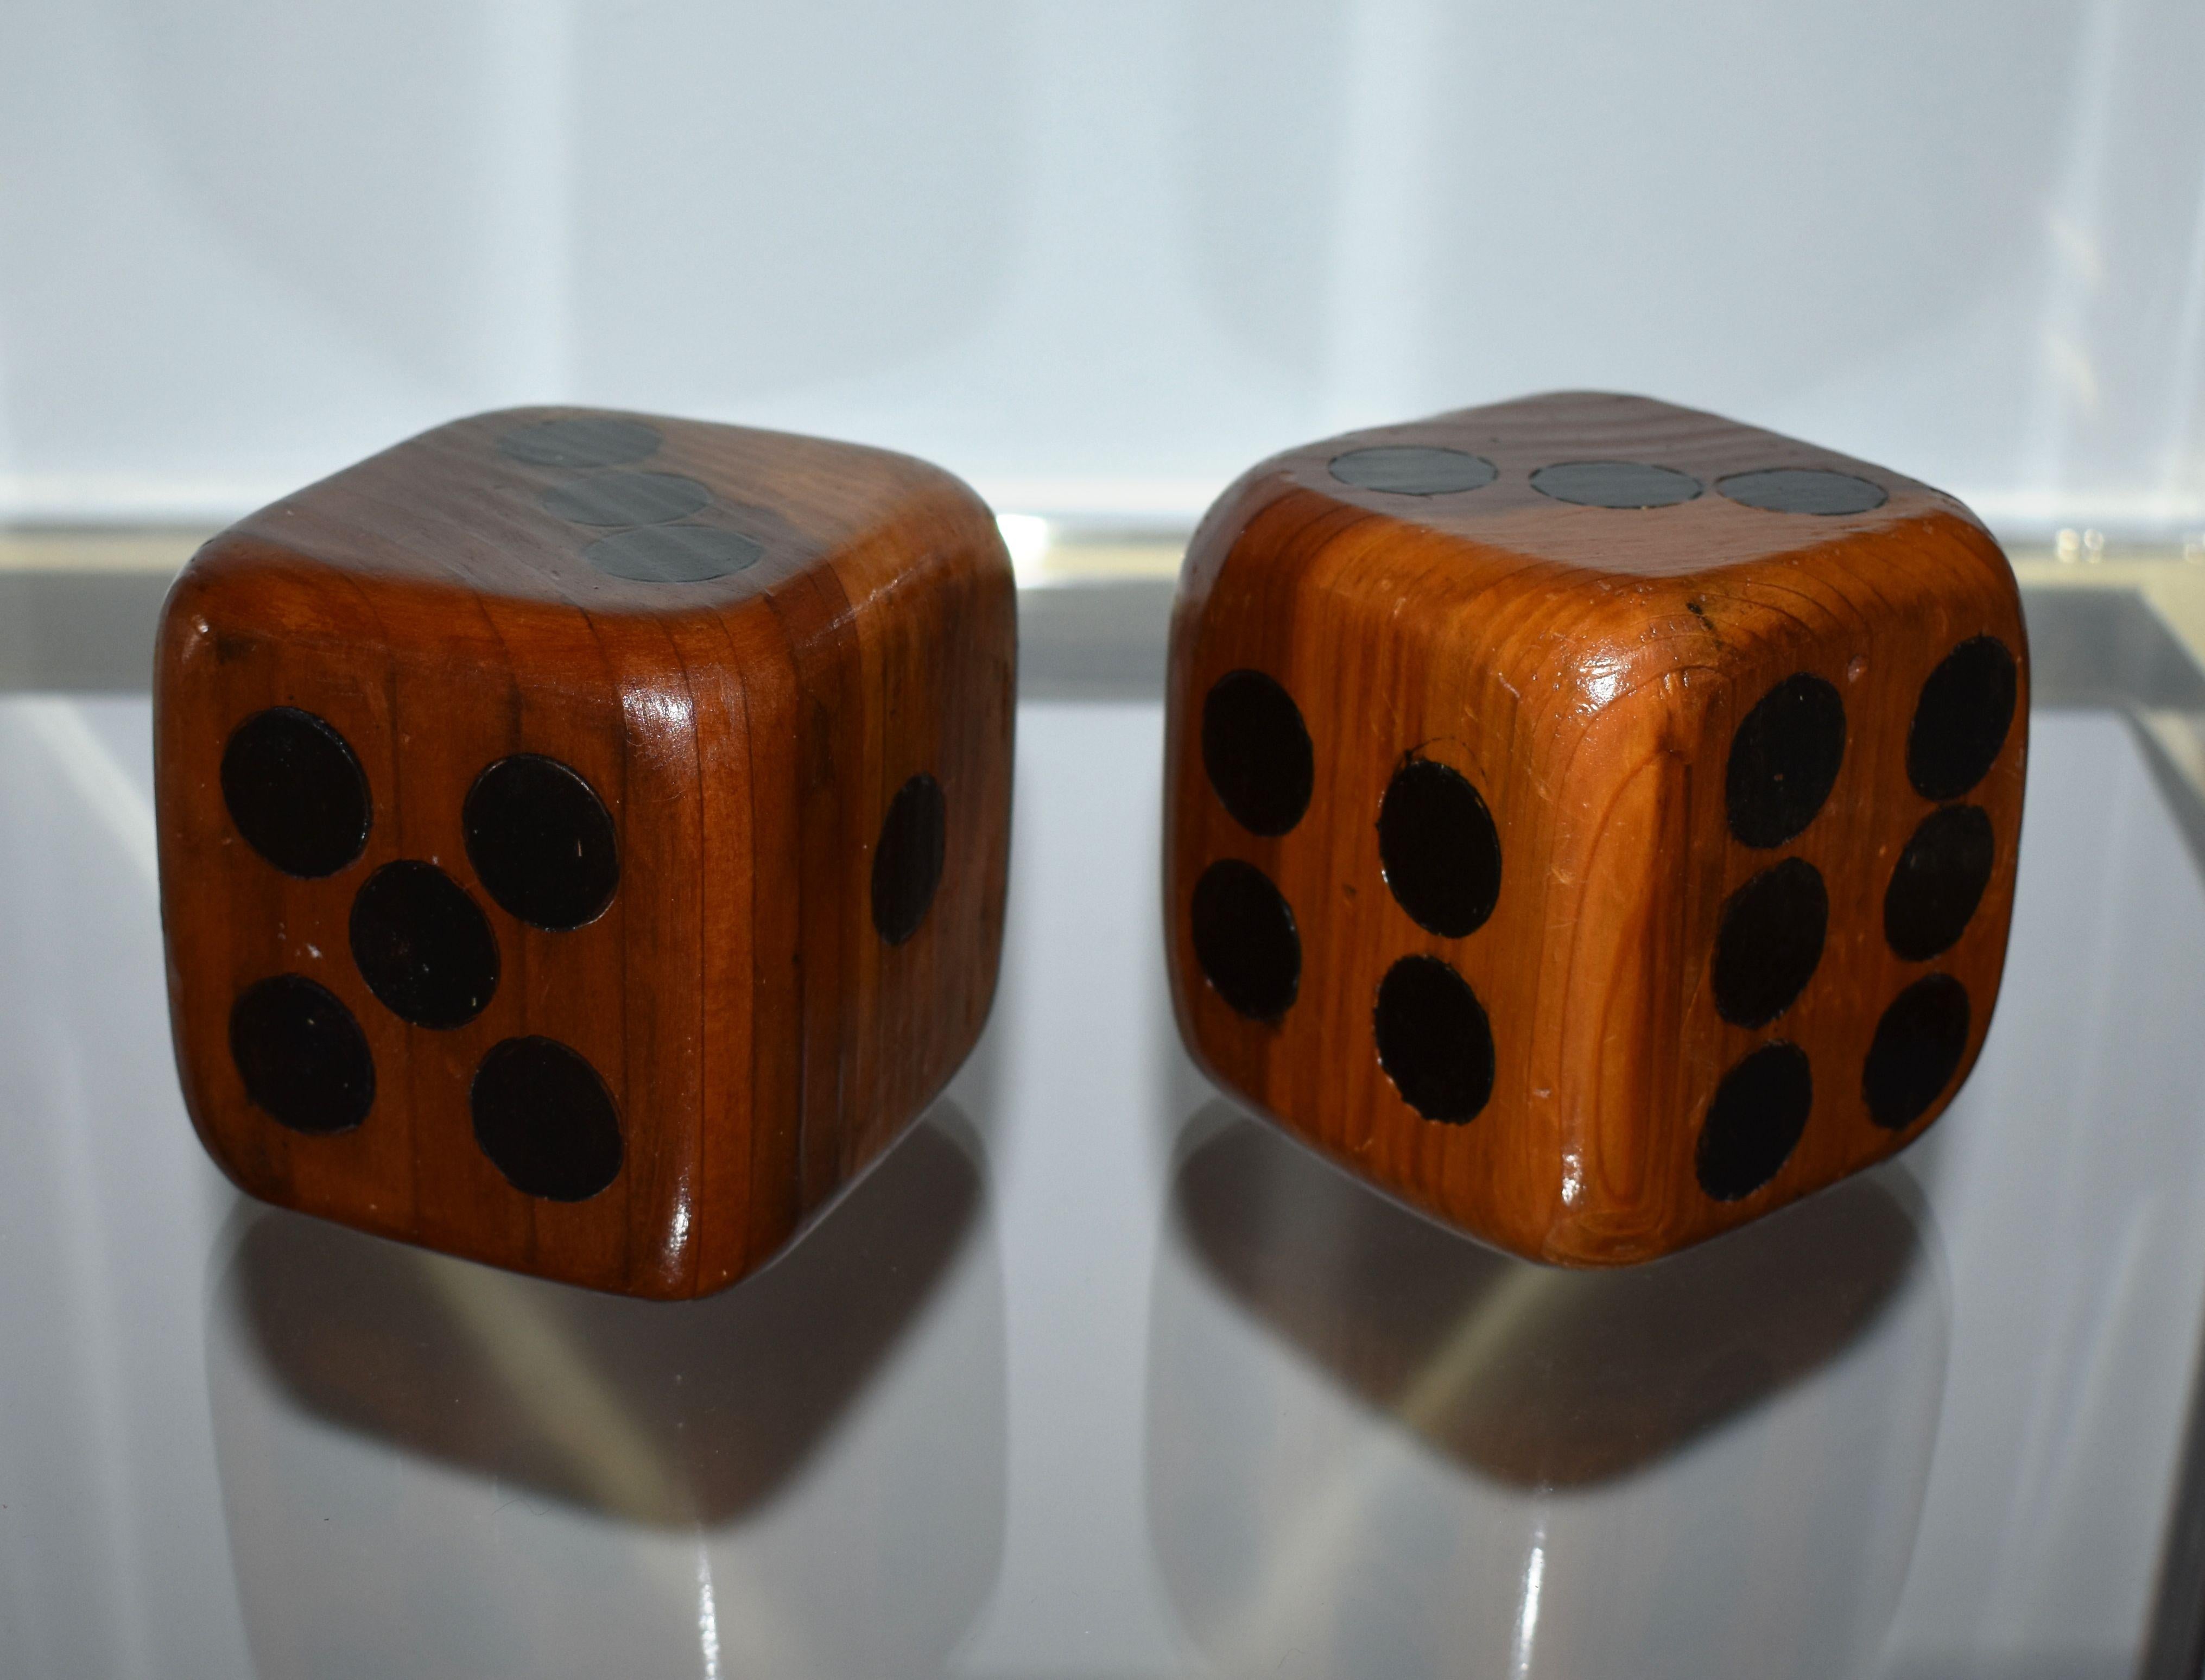 Pair of 1970s cedar wood handcrafted paperweight dices.